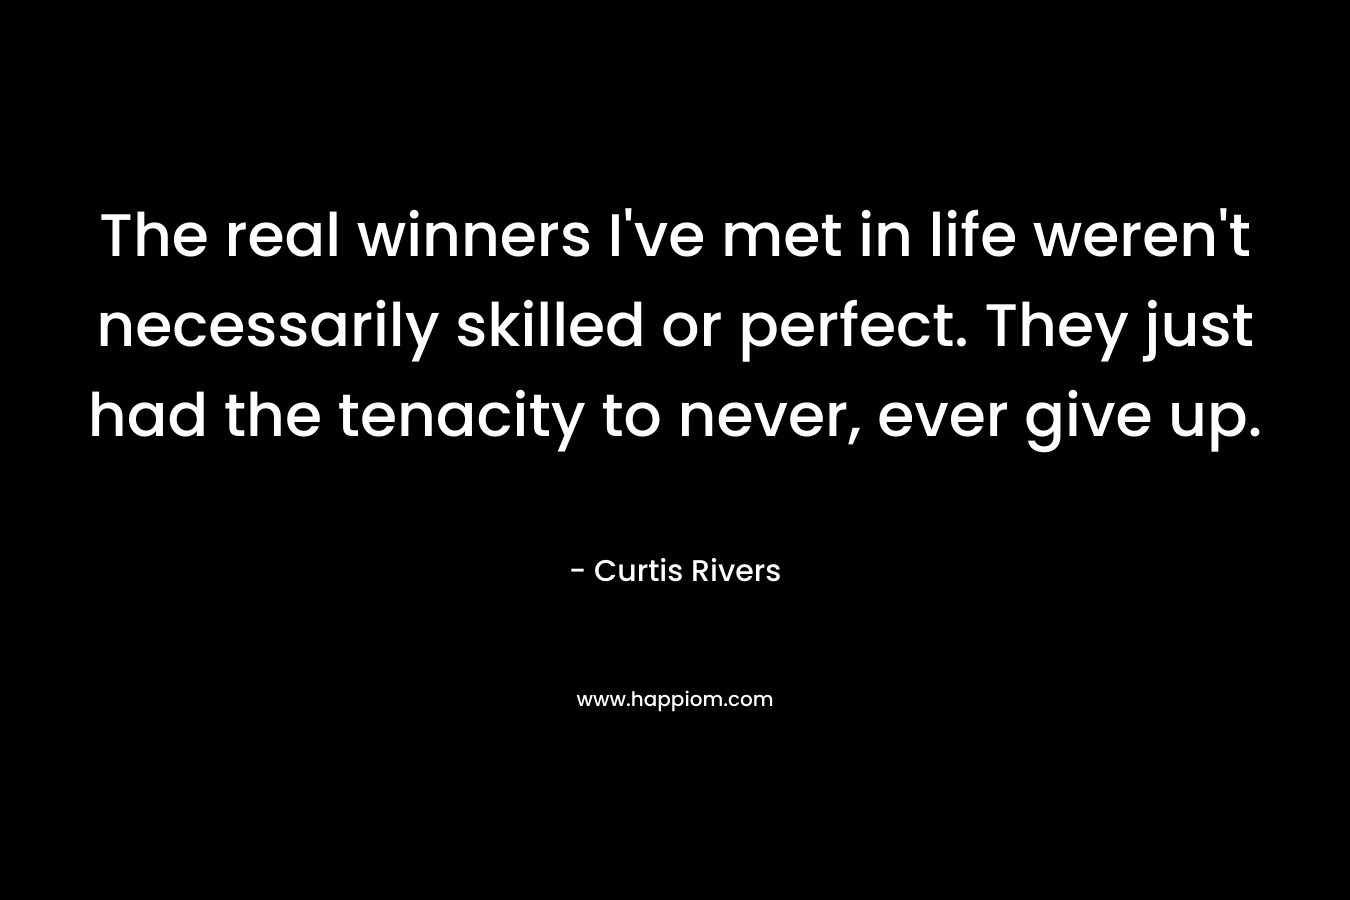 The real winners I've met in life weren't necessarily skilled or perfect. They just had the tenacity to never, ever give up.